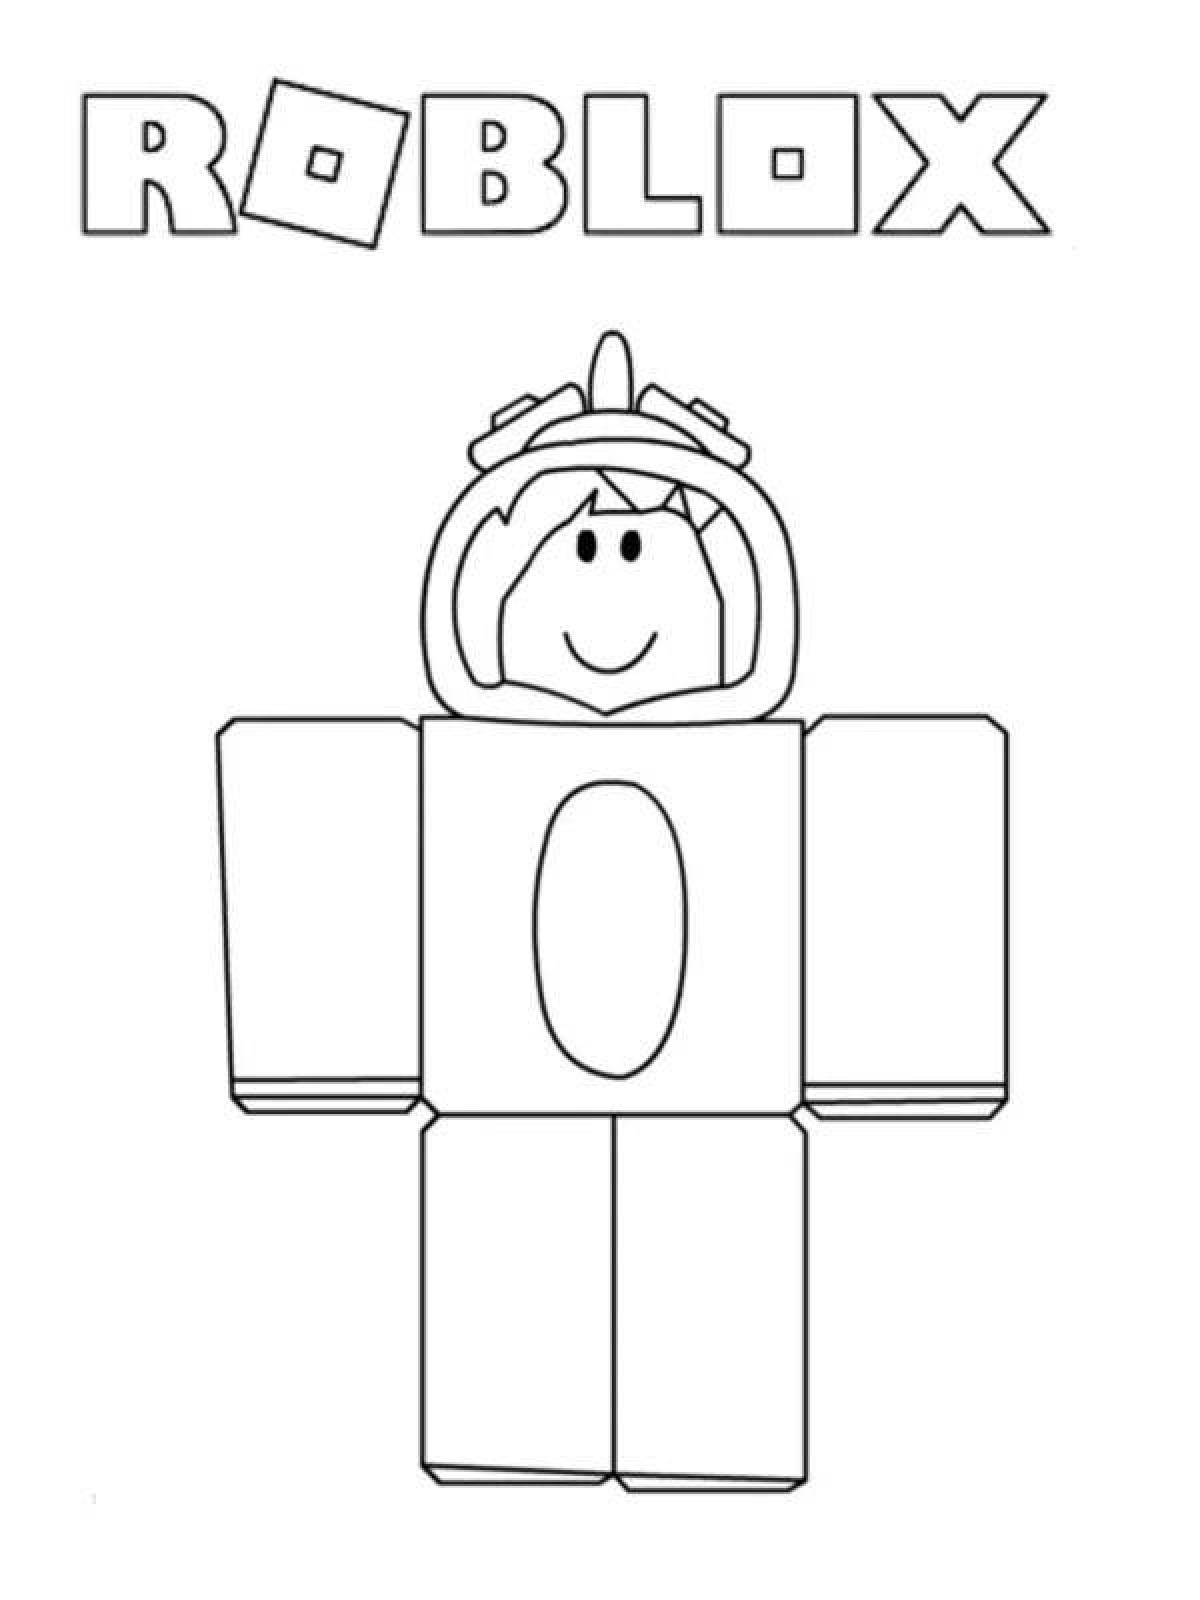 Great roblox coloring book for girls